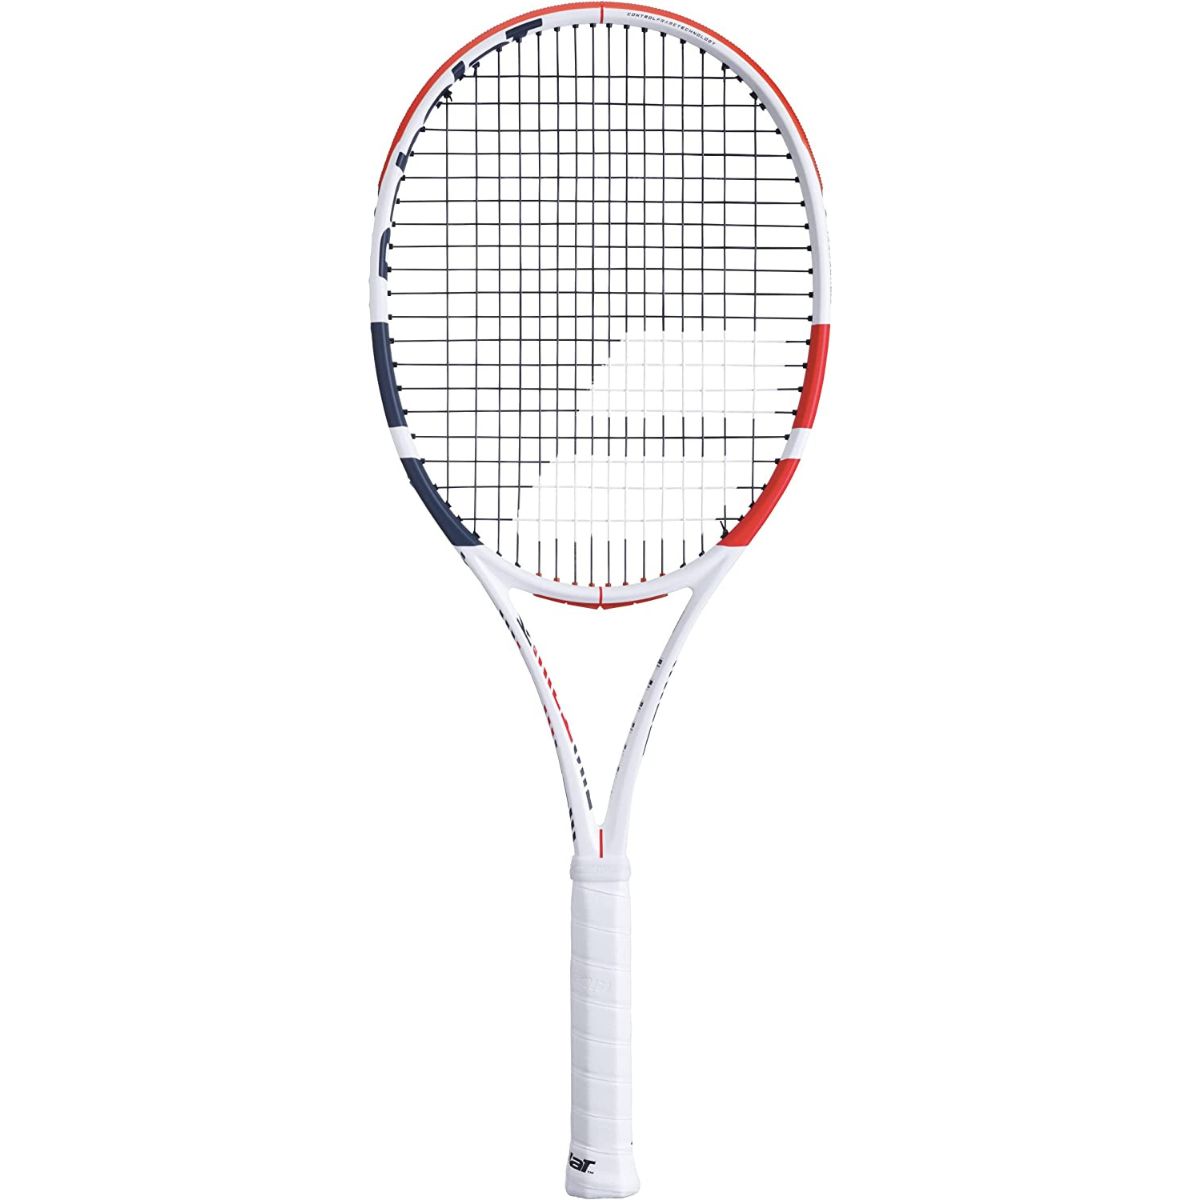 The Best Tennis Rackets for Advanced Players Options: Babolat Pure Strike 16x19